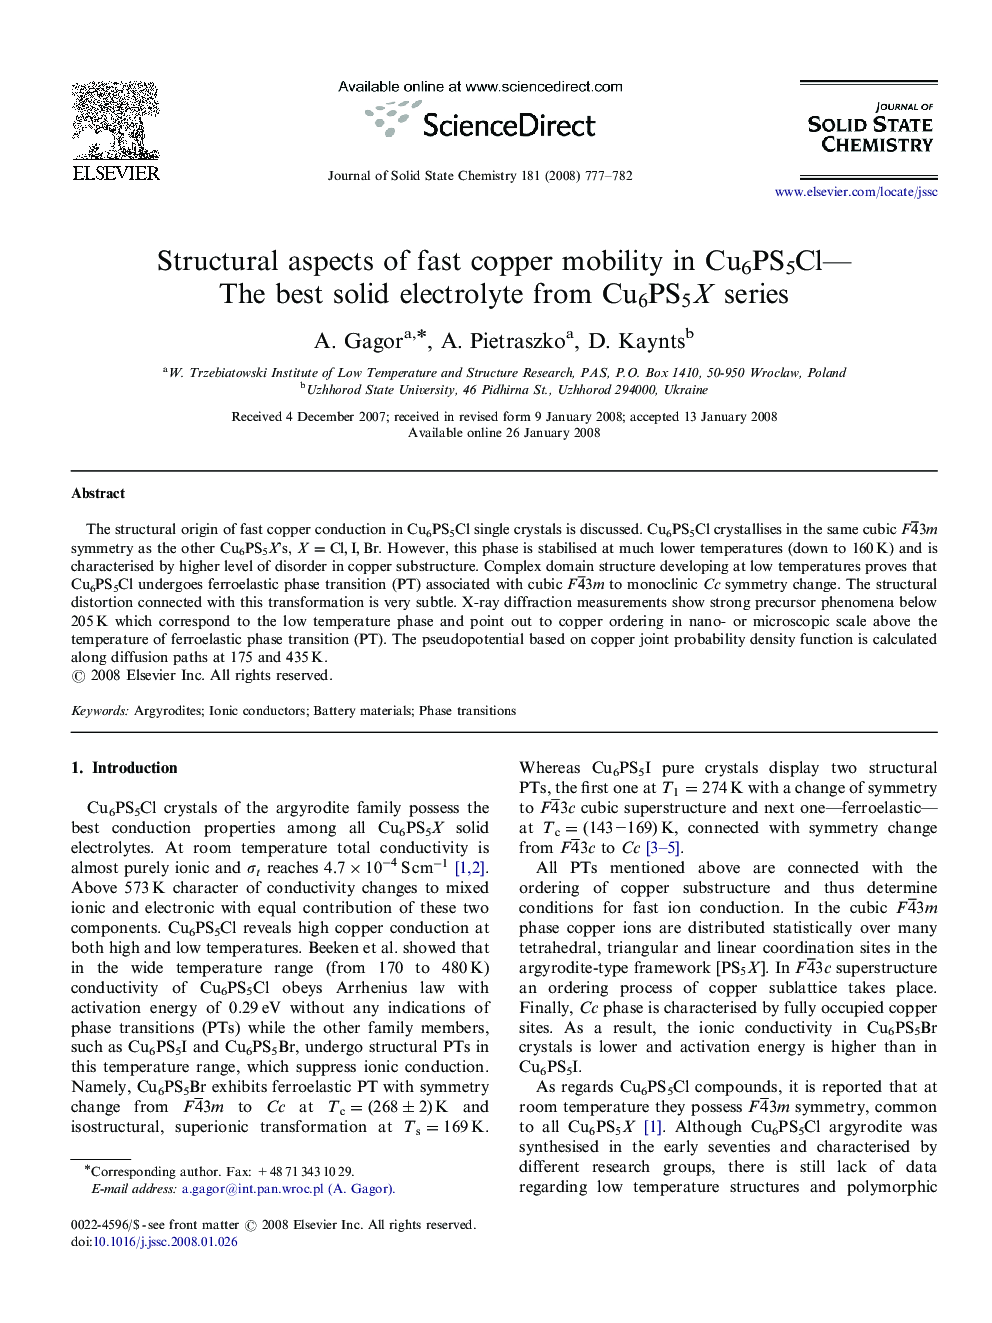 Structural aspects of fast copper mobility in Cu6PS5Cl—The best solid electrolyte from Cu6PS5XCu6PS5X series